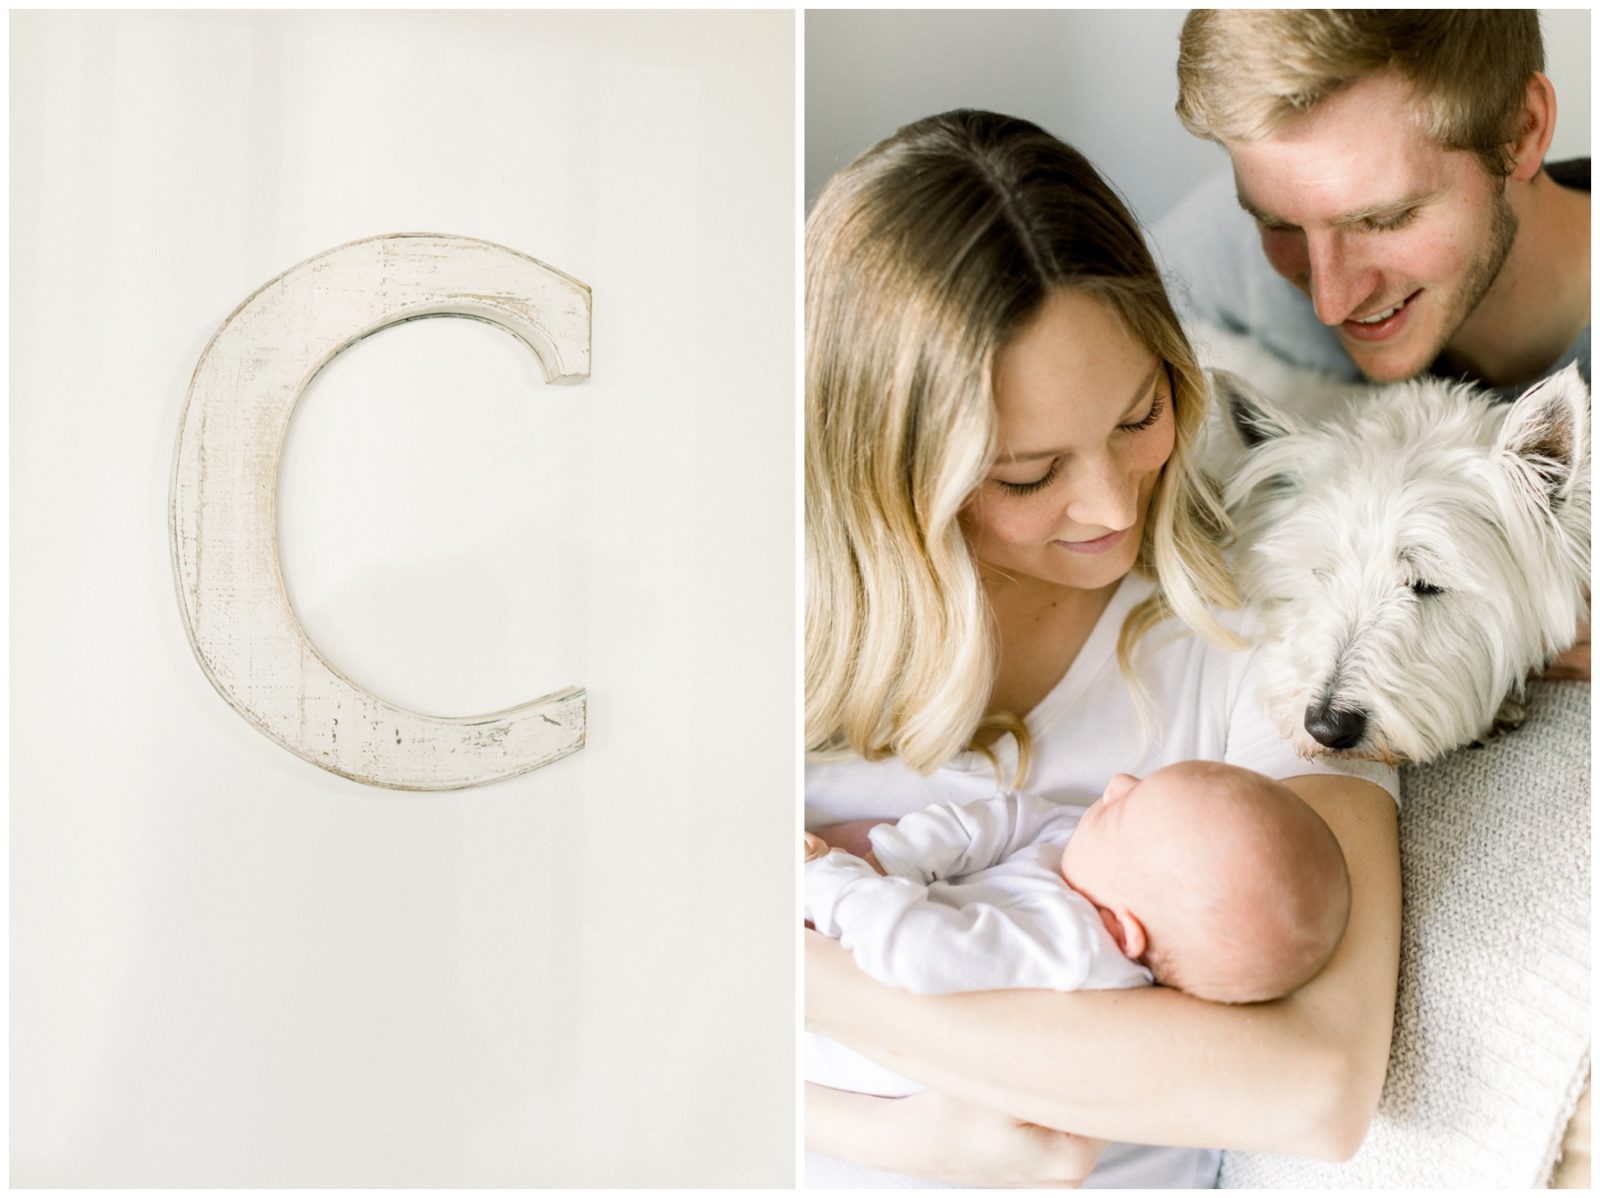 Two pictures side by side. The first one is a wall with a wooden letter C. The other picture shows a couple with a newborn baby and a white dog.